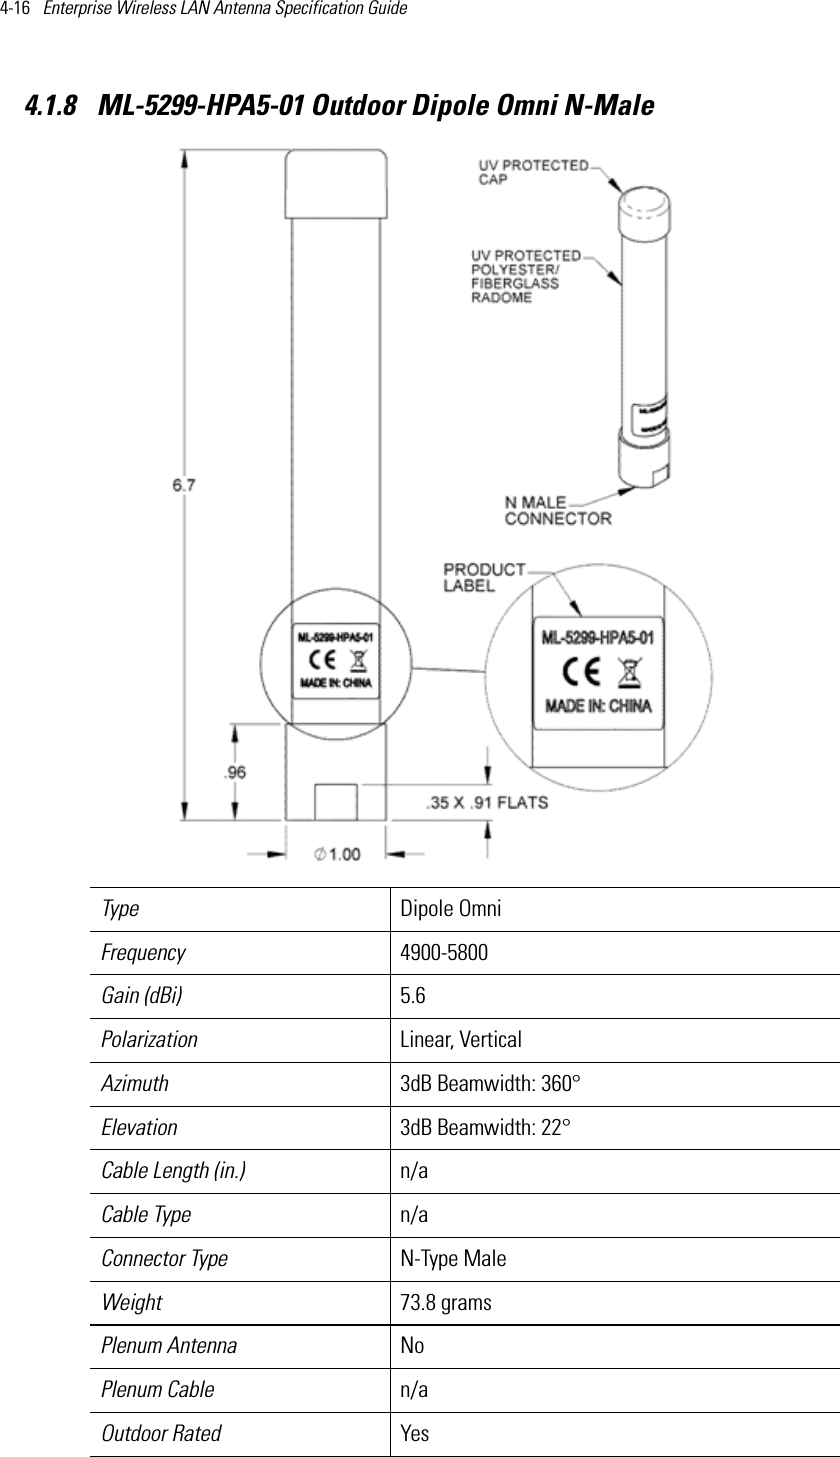 4-16   Enterprise Wireless LAN Antenna Specification Guide 4.1.8  ML-5299-HPA5-01 Outdoor Dipole Omni N-MaleType Dipole OmniFrequency 4900-5800Gain (dBi) 5.6Polarization Linear, VerticalAzimuth 3dB Beamwidth: 360°Elevation 3dB Beamwidth: 22°Cable Length (in.) n/aCable Type n/aConnector Type N-Type MaleWeight 73.8 gramsPlenum Antenna NoPlenum Cable n/aOutdoor Rated Yes